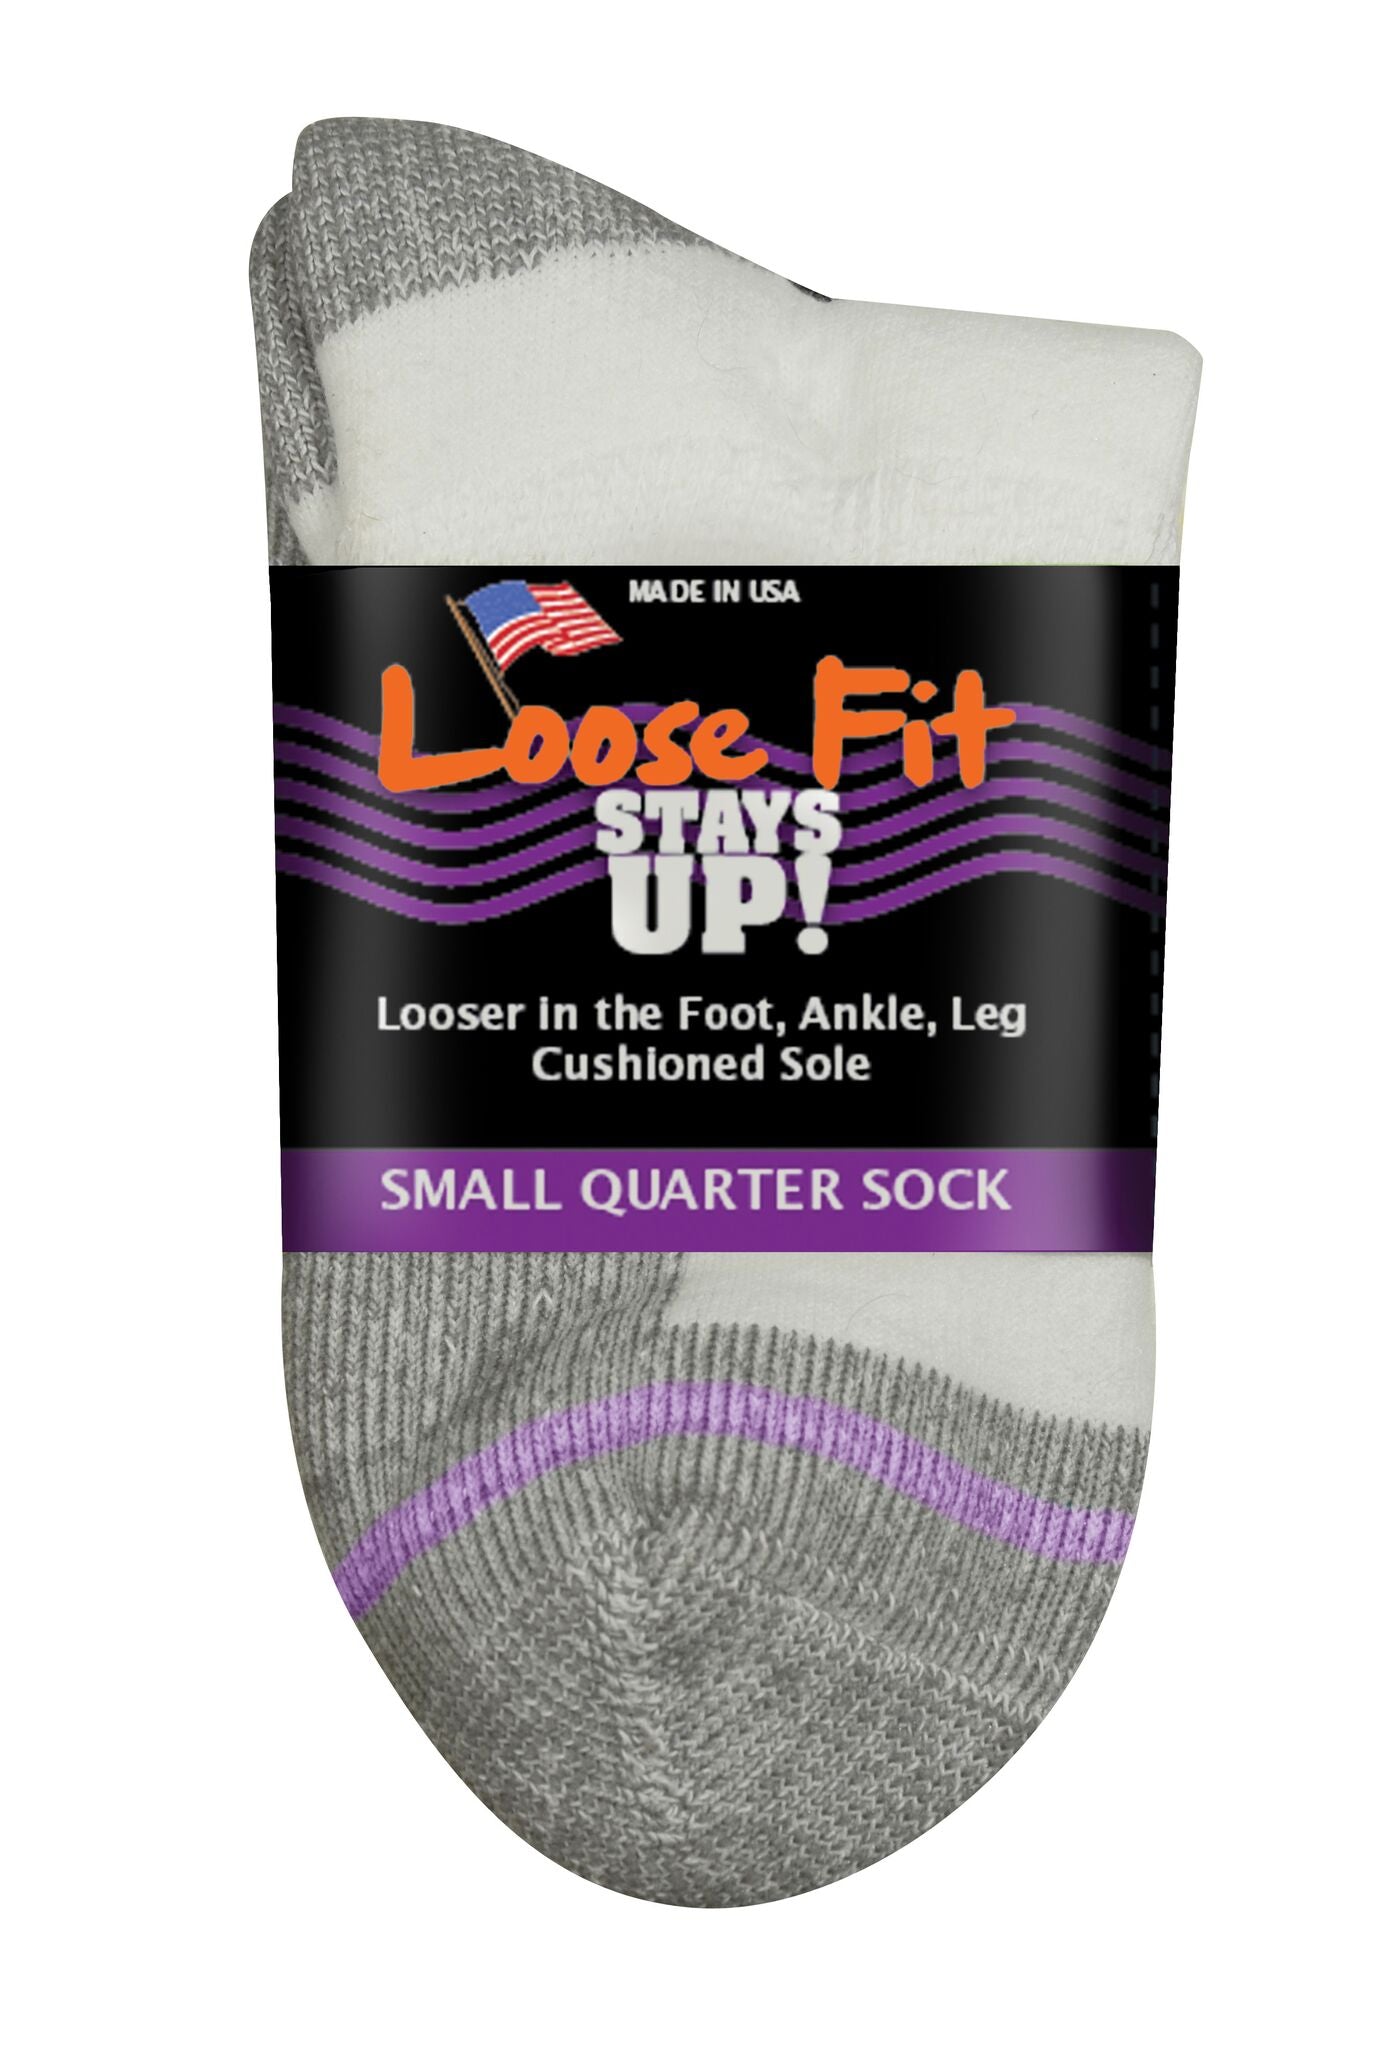 Loose Fit Stays Up Men's and Women's Casual Lower Cut Socks (Pack of 3)  Made in USA, Cushioned Sole